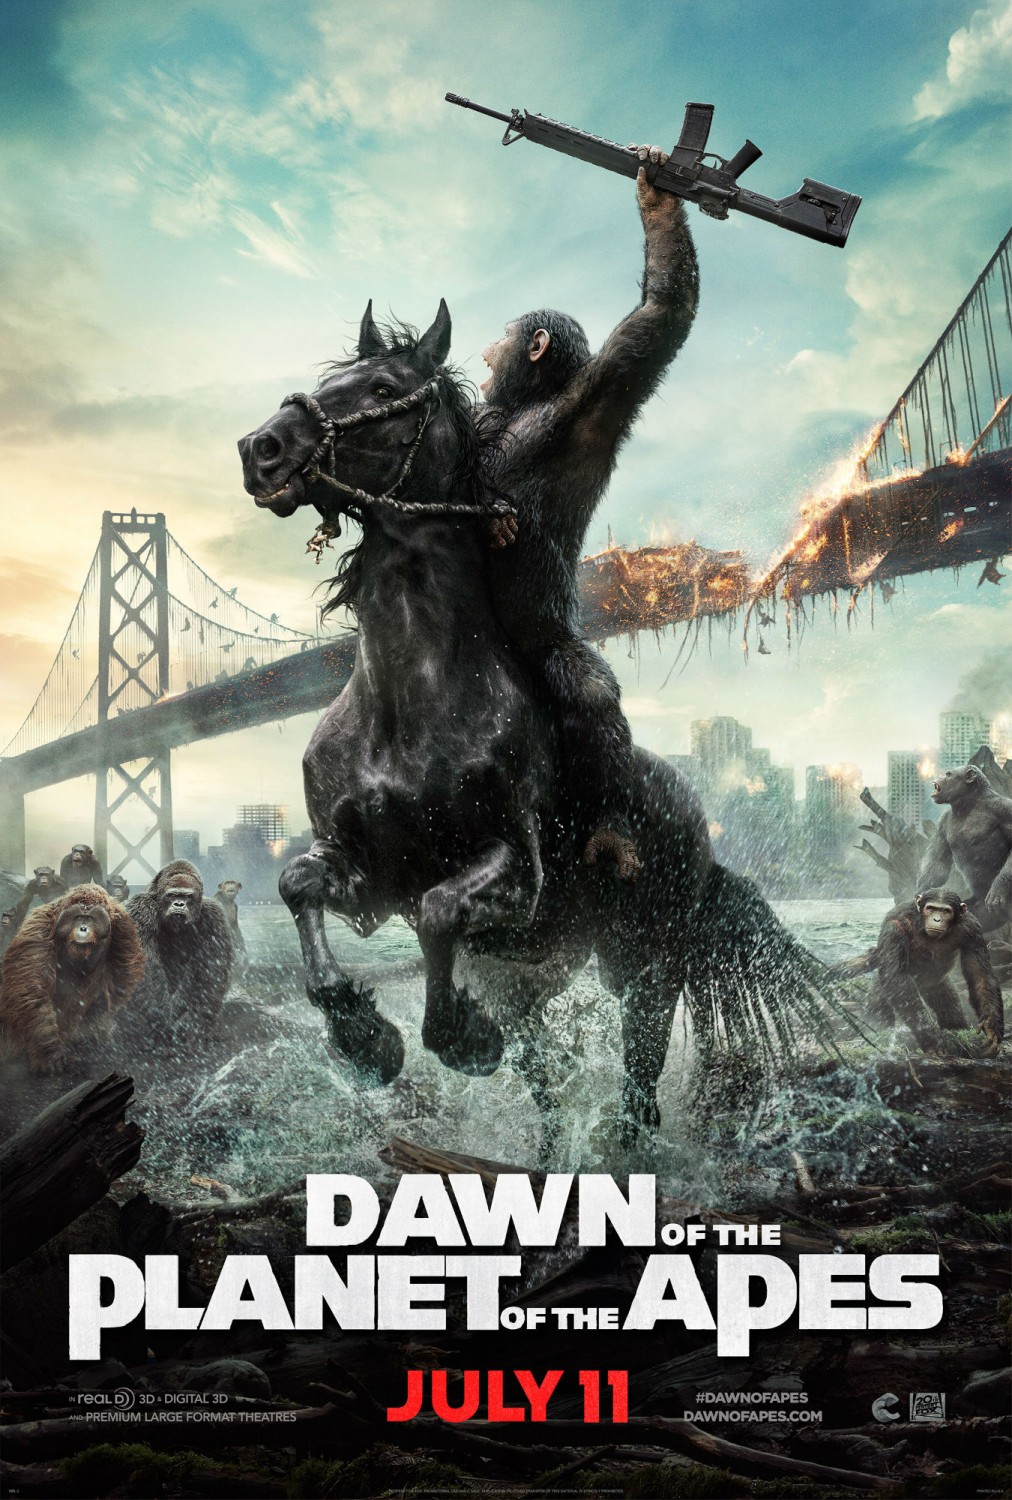 Dawn of the Planet of the Apes Art